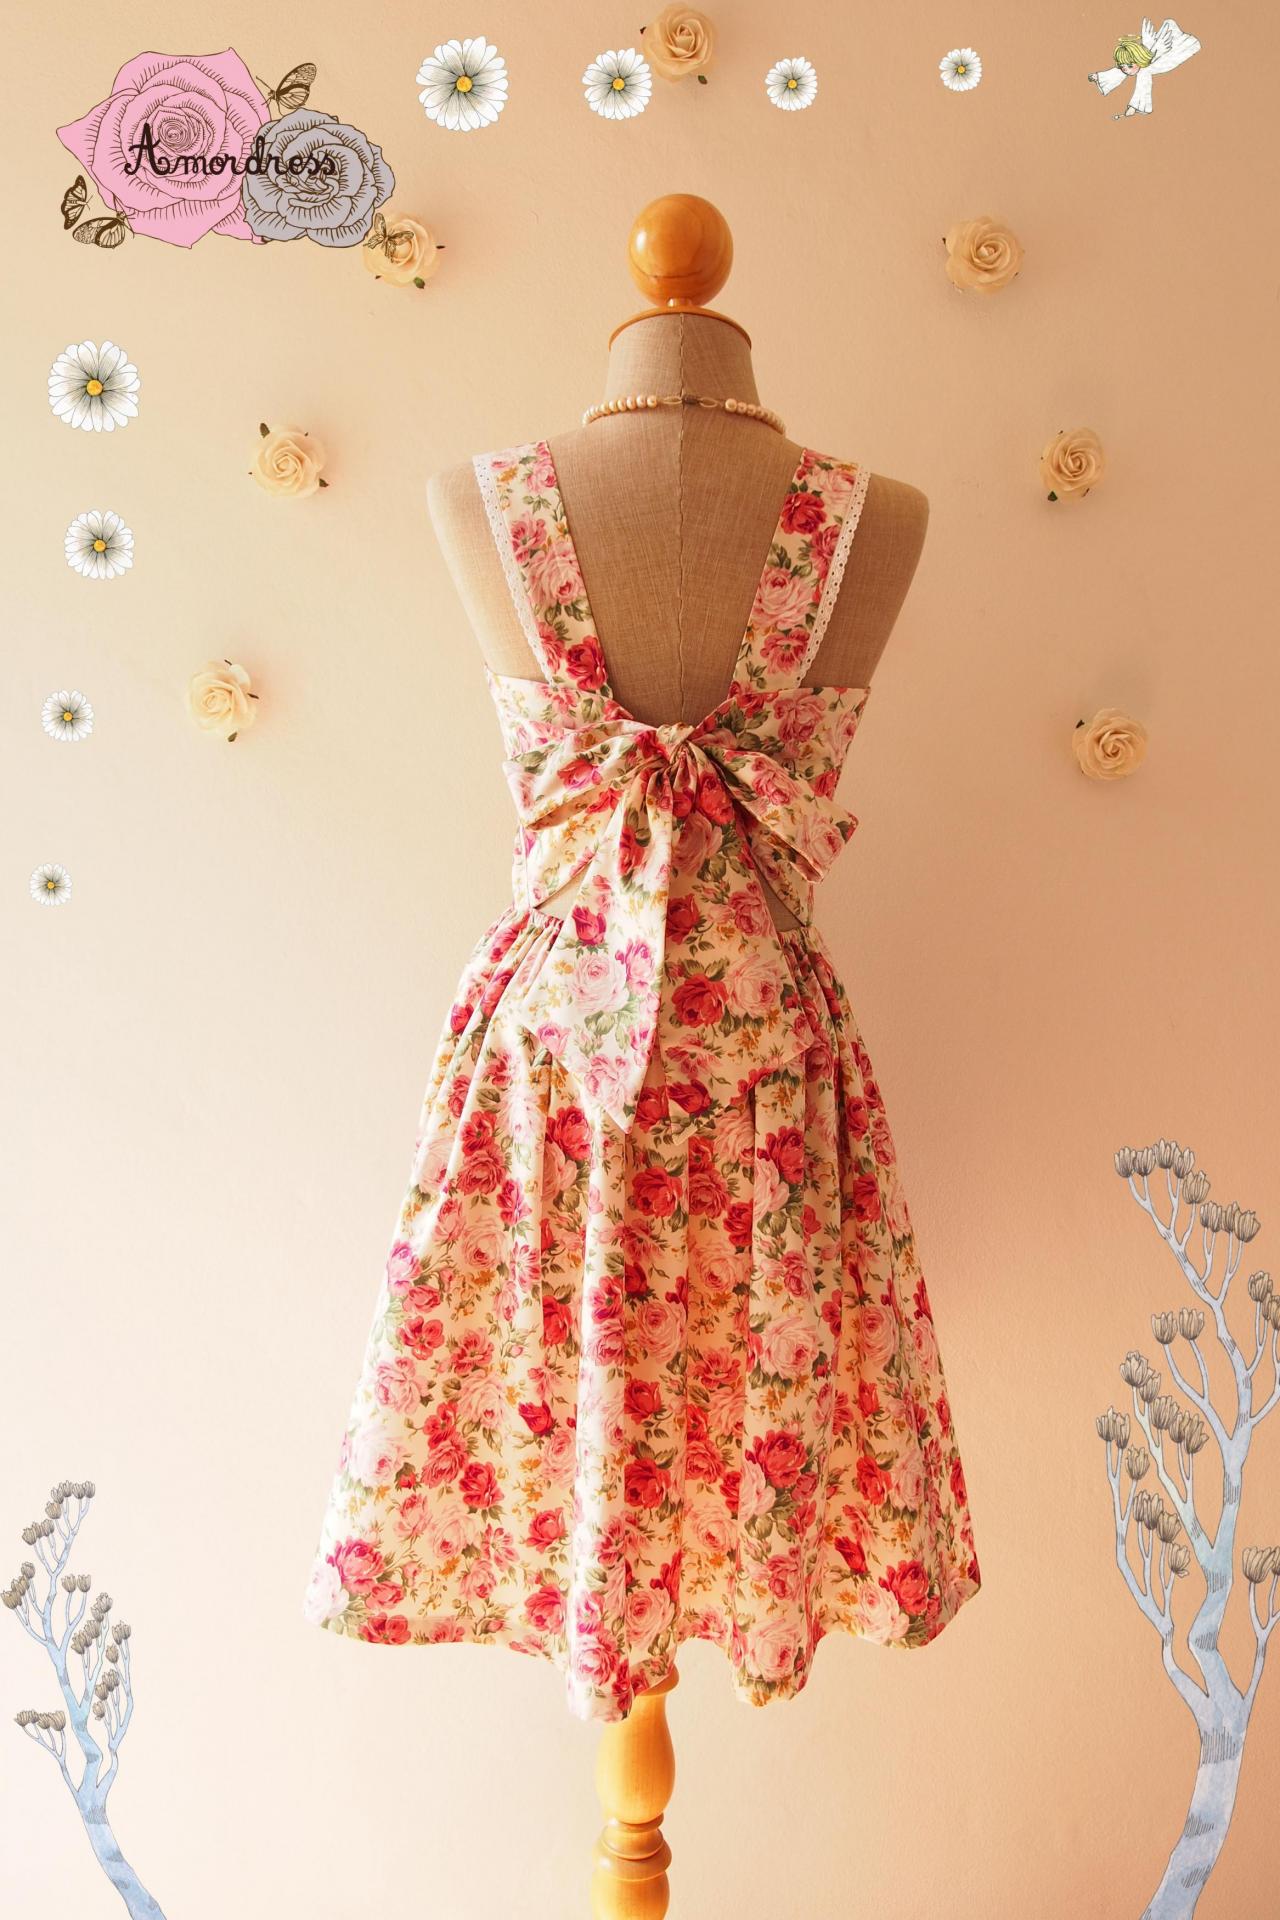 Fairy Wings Floral Summer Dress Vintage Inspired Backless Bow Dress Floral Bridesmaid Dress Cream Pink Floral Party Dress- Size Xs-xl